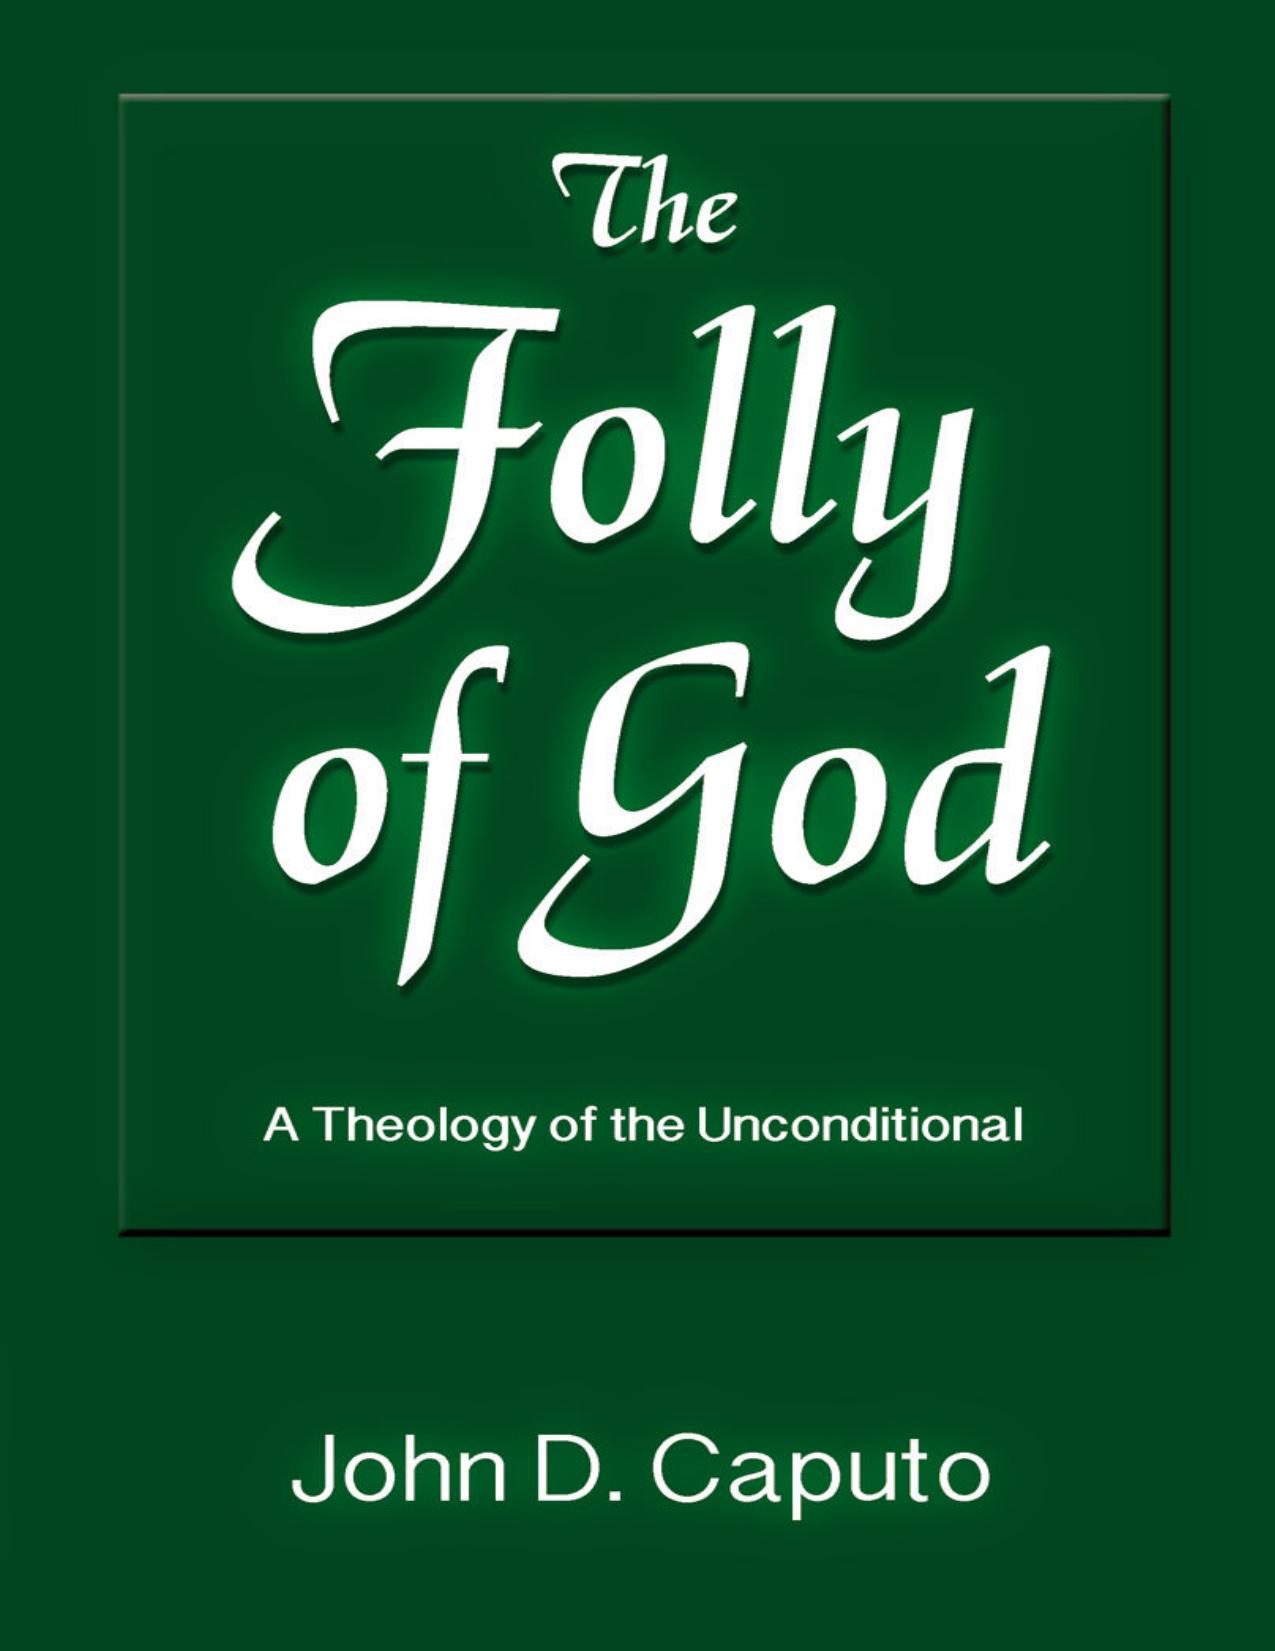 The Folly of God: A Theology of the Unconditional by John D. Caputo